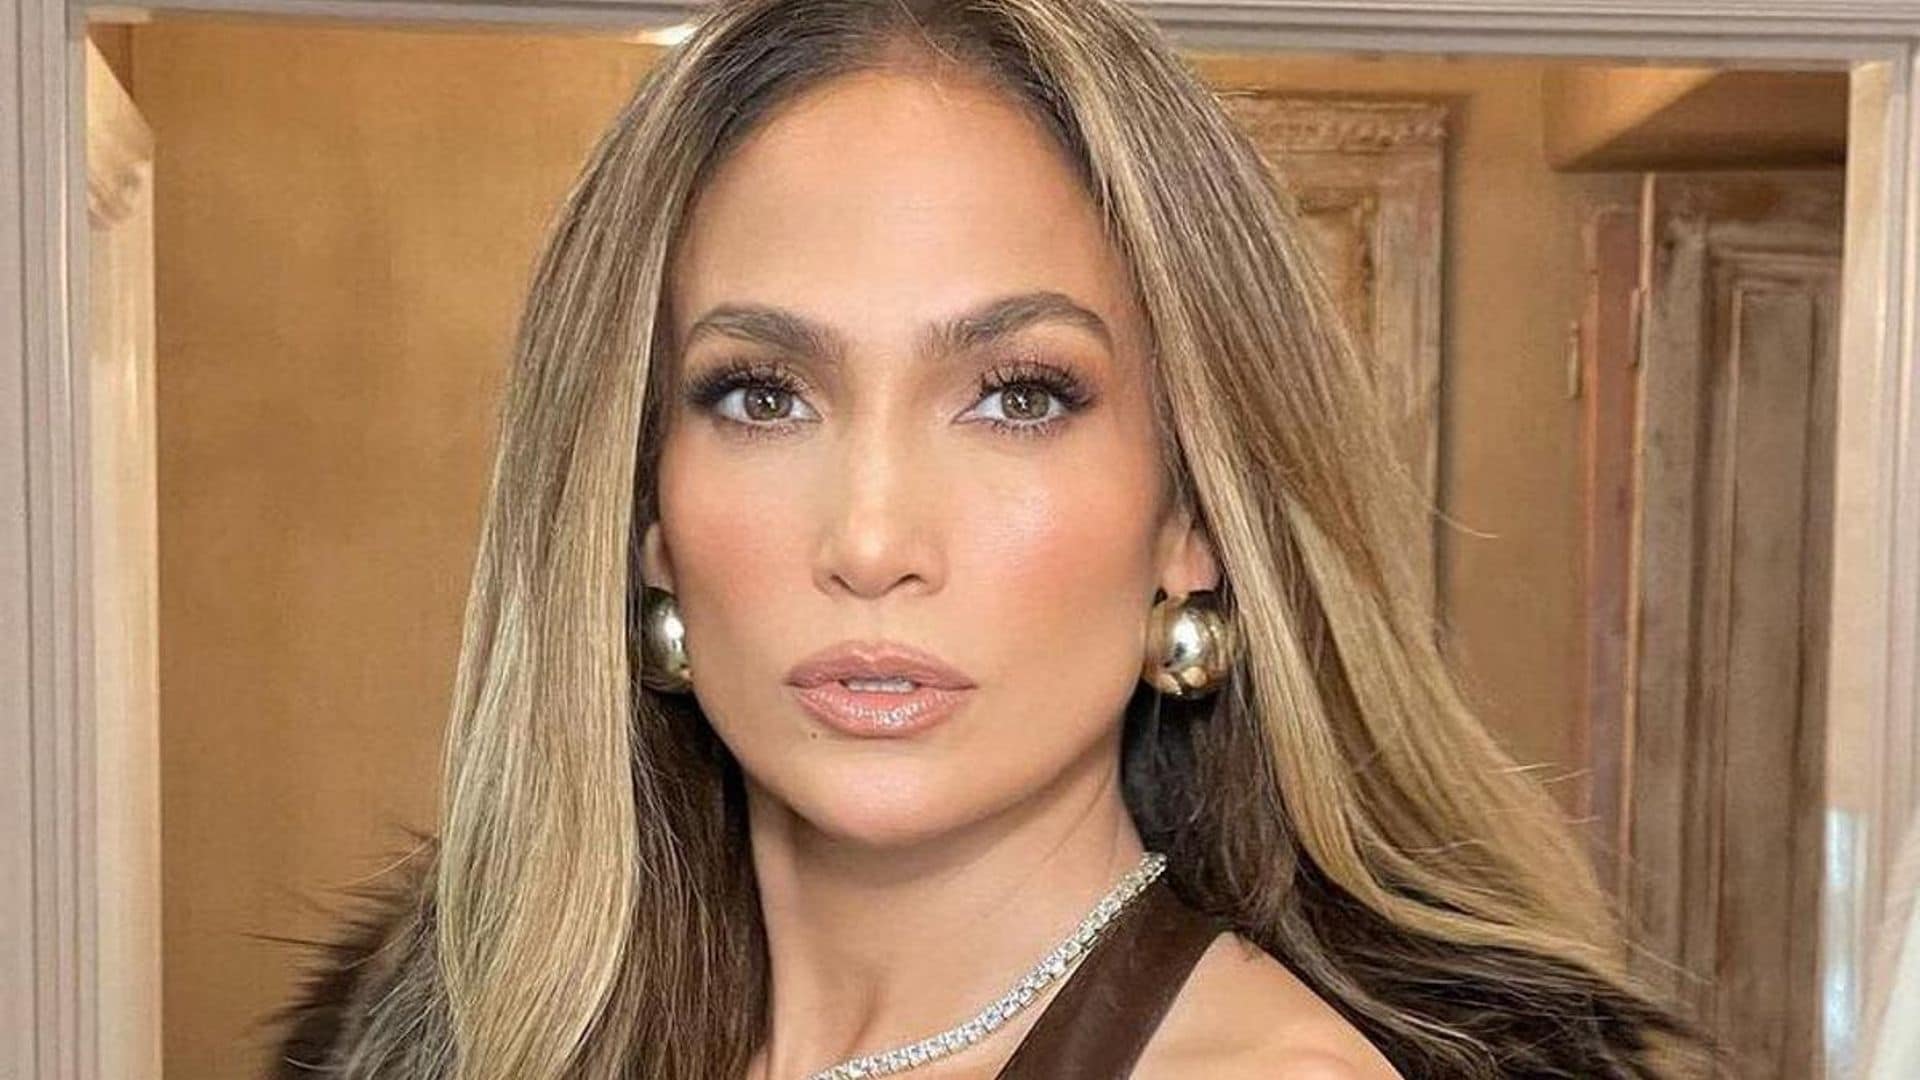 Jennifer Lopez shows off her signature casual chic look in latest photo